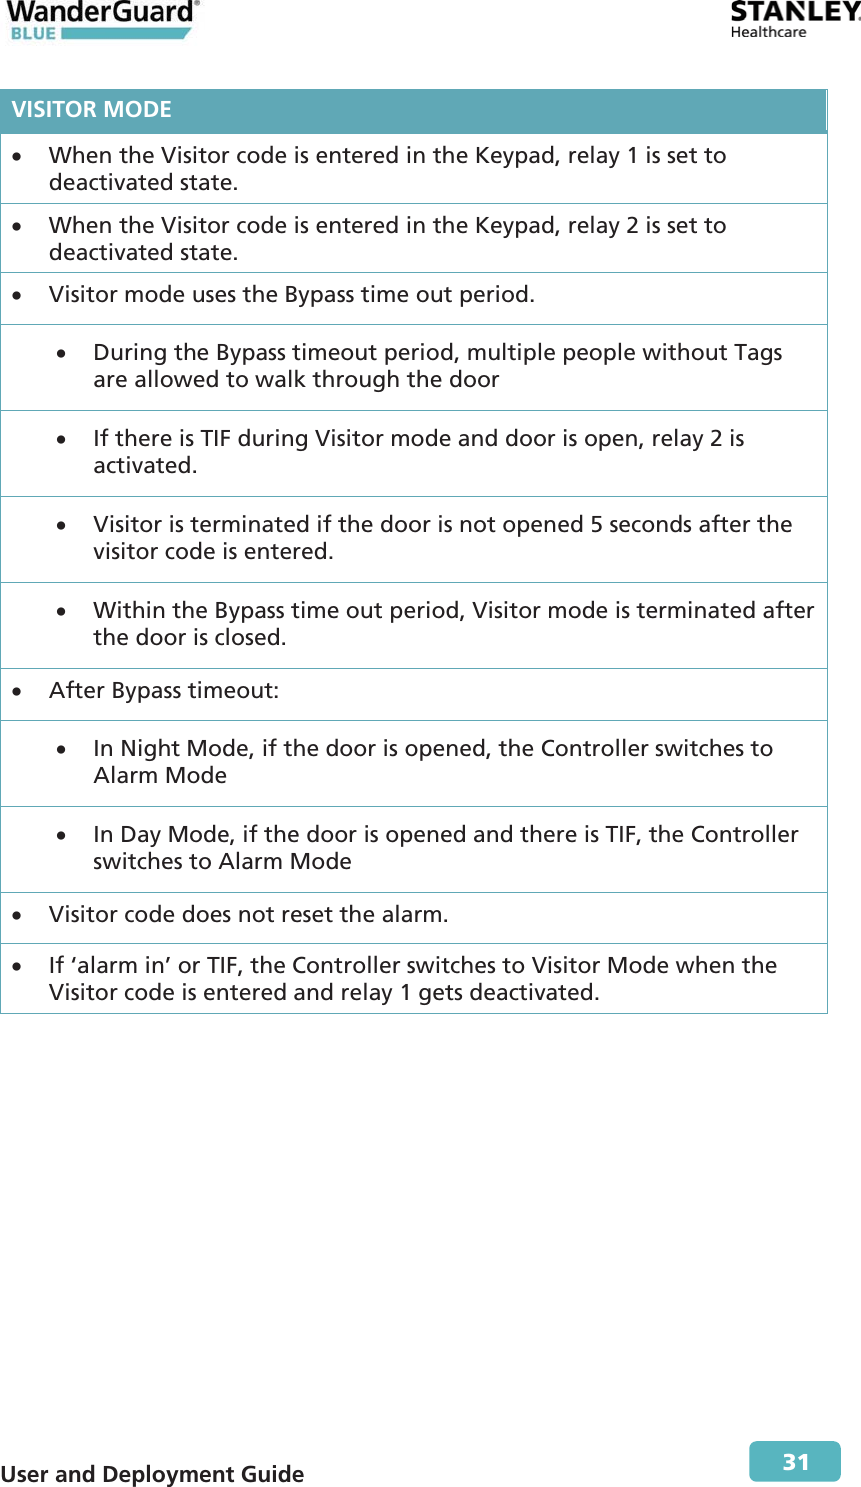  User and Deployment Guide        31 VISITOR MODEx When the Visitor code is entered in the Keypad, relay 1 is set to deactivated state. x When the Visitor code is entered in the Keypad, relay 2 is set to deactivated state. x Visitor mode uses the Bypass time out period. x During the Bypass timeout period, multiple people without Tags are allowed to walk through the door x If there is TIF during Visitor mode and door is open, relay 2 is activated. x Visitor is terminated if the door is not opened 5 seconds after the visitor code is entered. x Within the Bypass time out period, Visitor mode is terminated after the door is closed. x After Bypass timeout: x In Night Mode, if the door is opened, the Controller switches to Alarm Mode xIn Day Mode, if the door is opened and there is TIF, the Controller switches to Alarm Mode x Visitor code does not reset the alarm. xIf ‘alarm in’ or TIF, the Controller switches to Visitor Mode when the Visitor code is entered and relay 1 gets deactivated. 